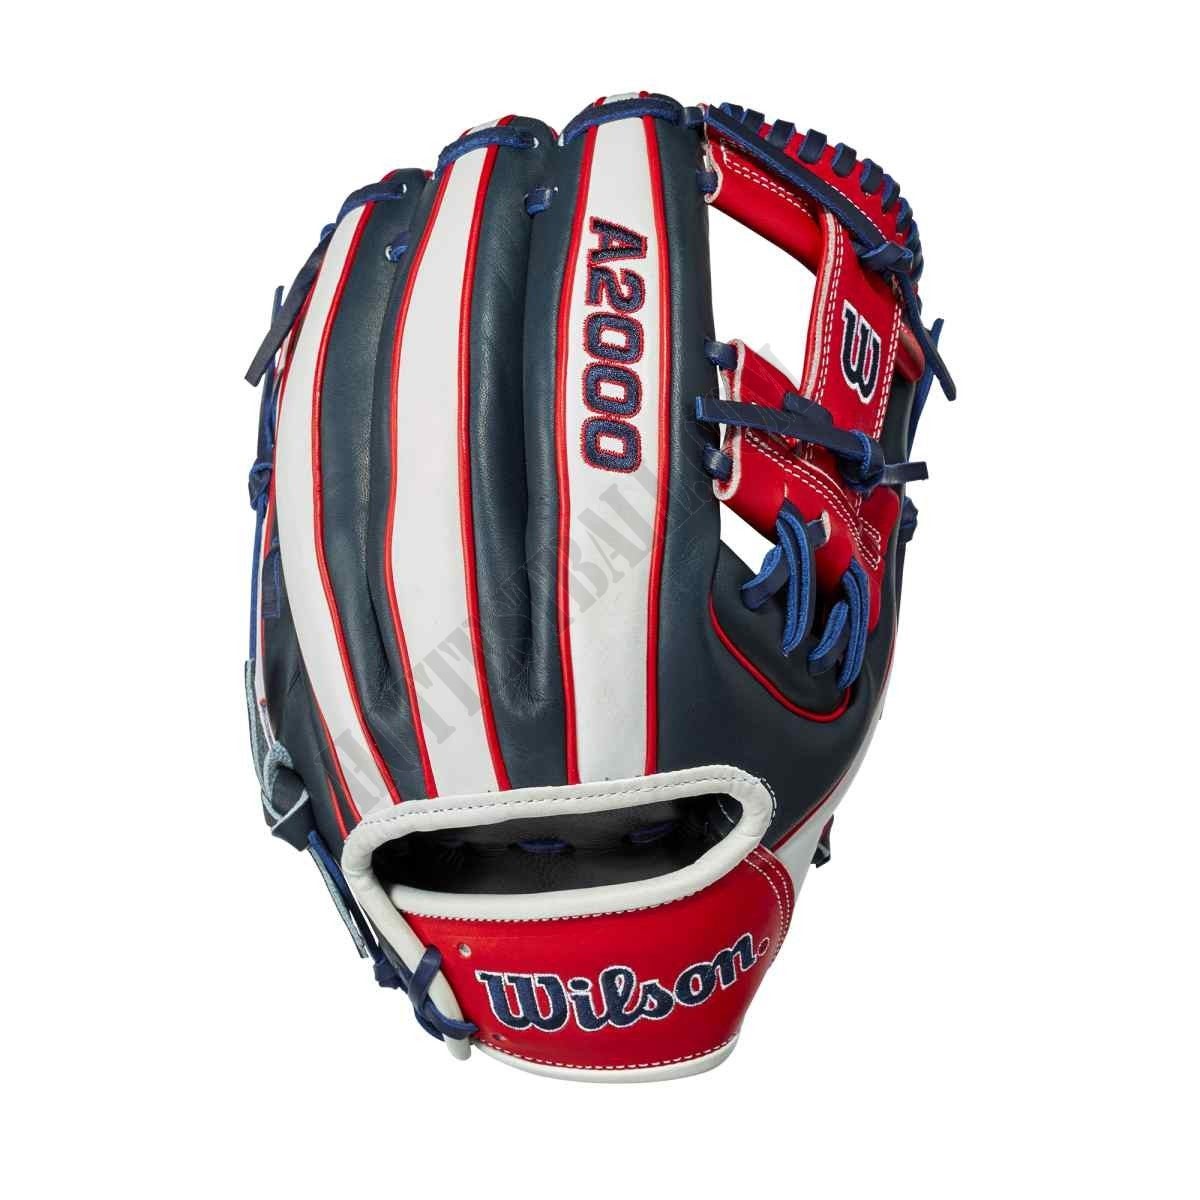 2021 A2000 1786 Cuba 11.5" Infield Baseball Glove - Limited Edition ● Wilson Promotions - -1